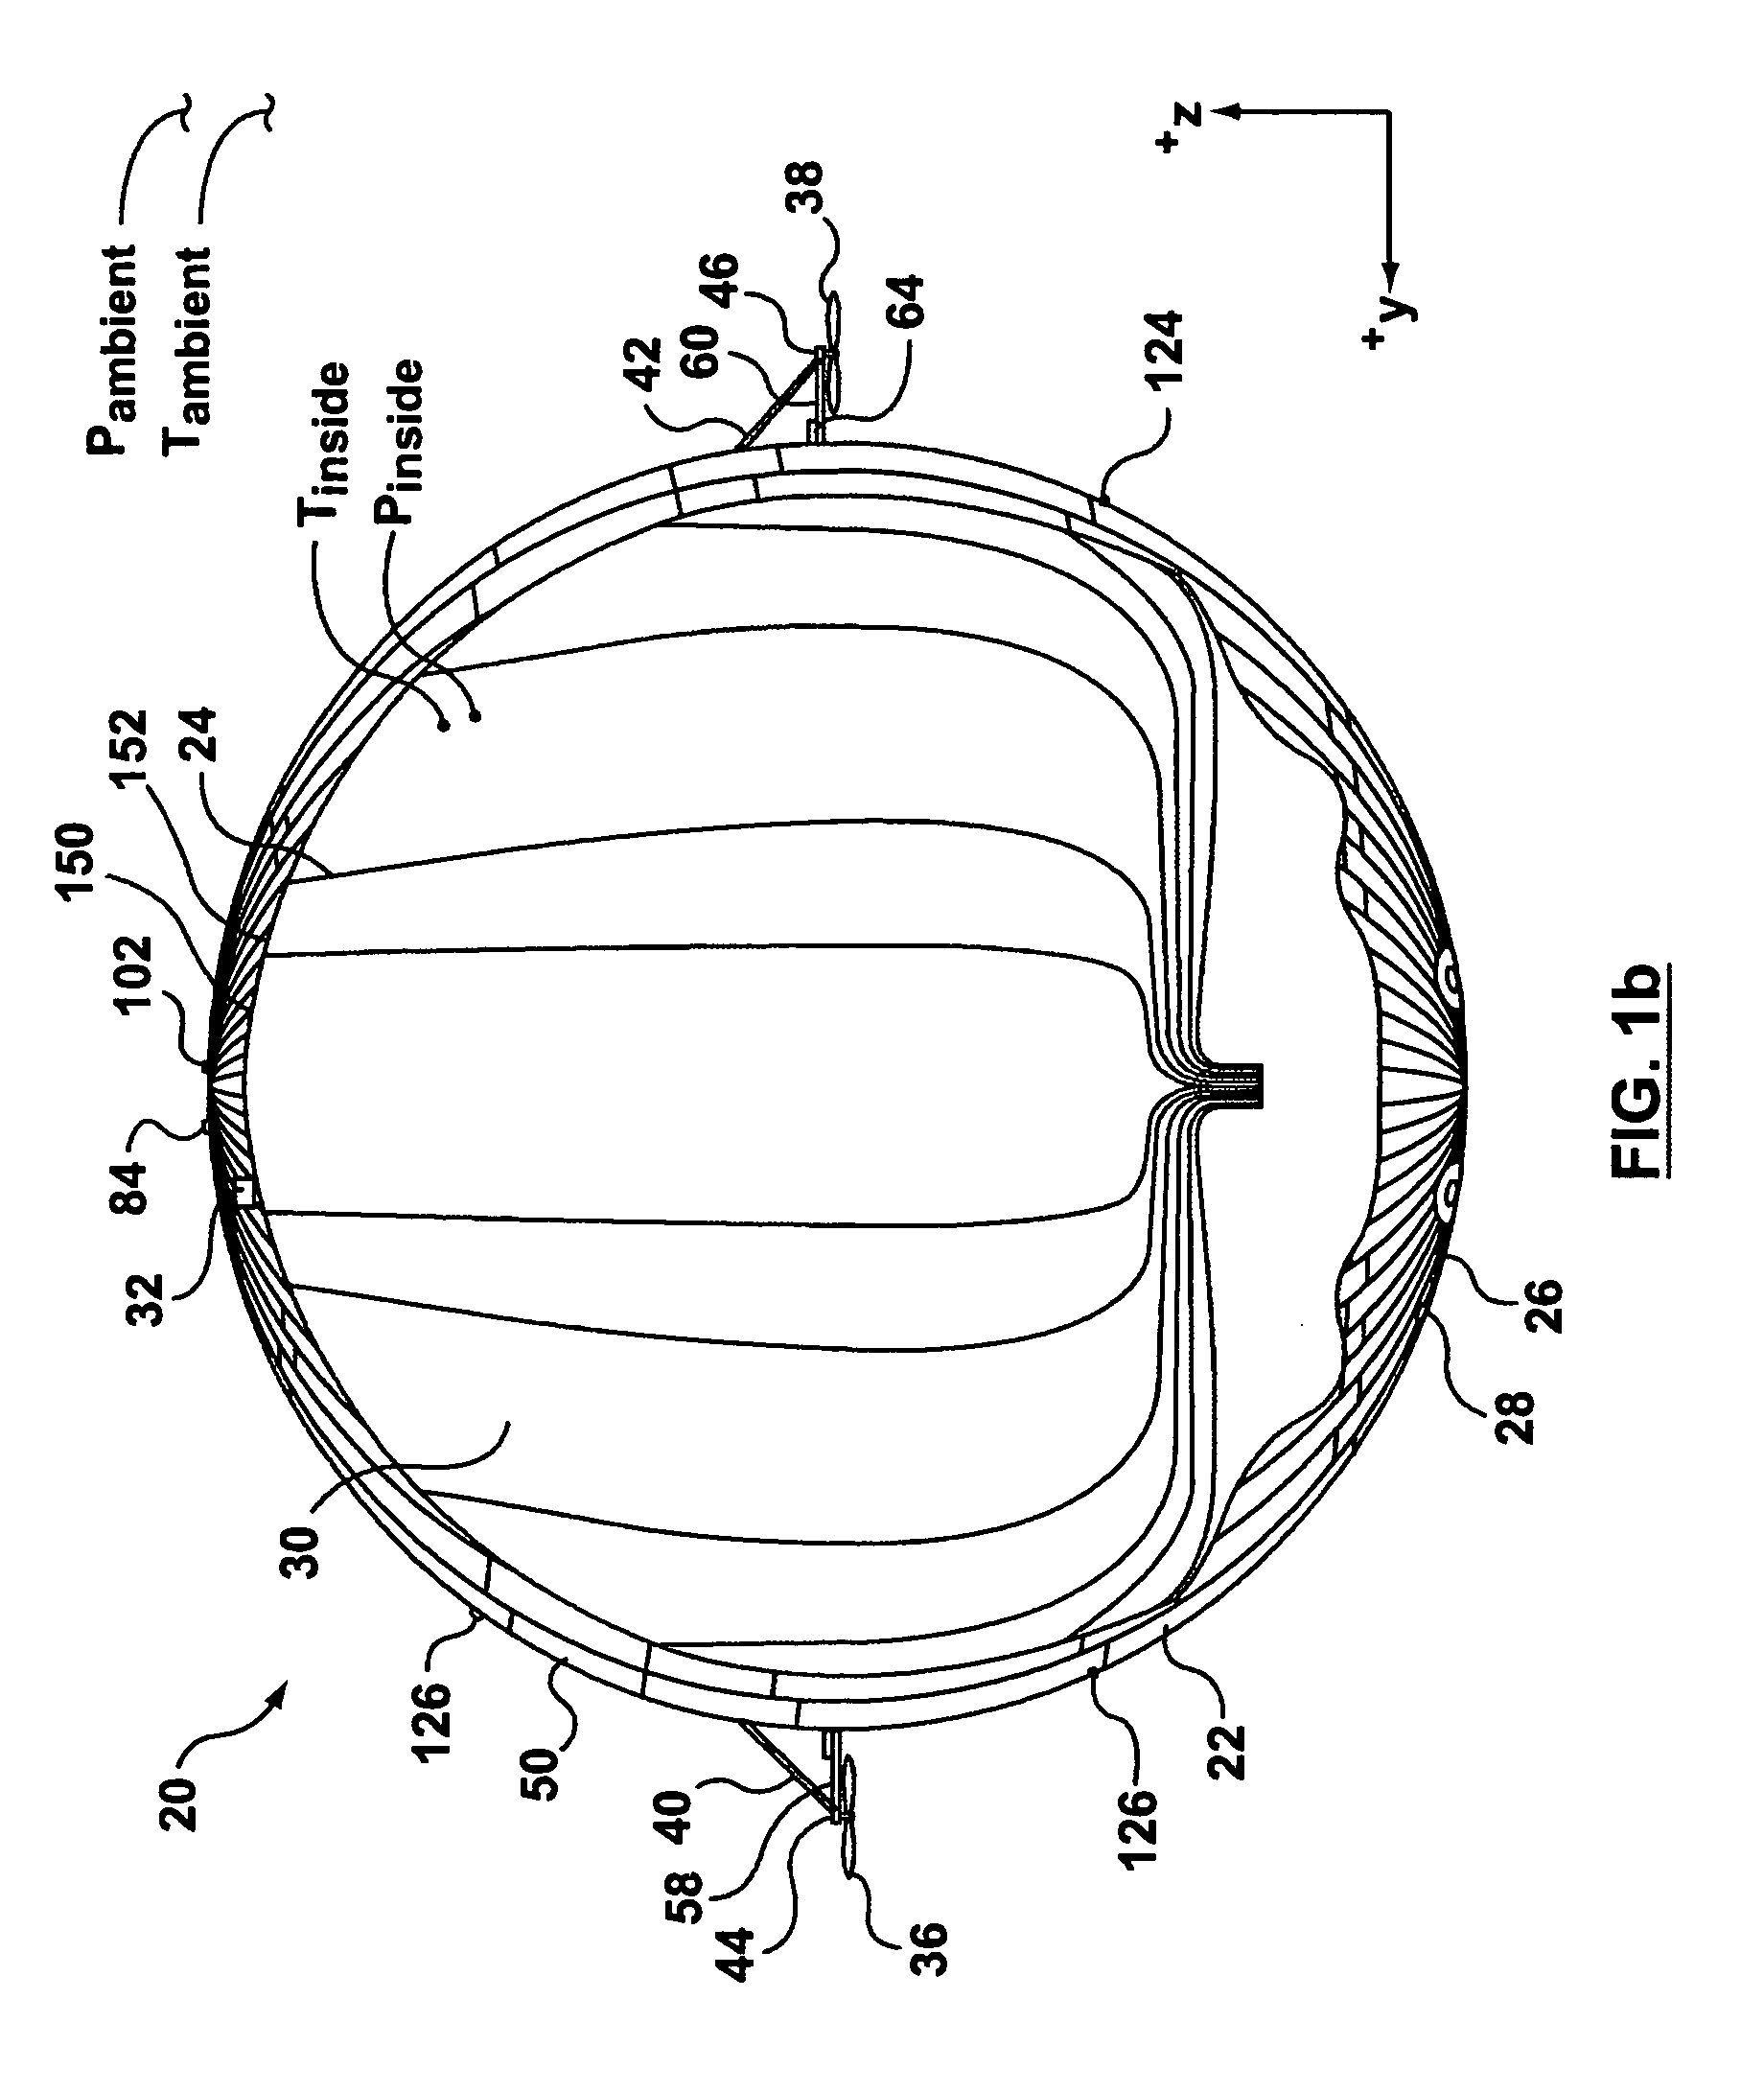 Airship and method of operation